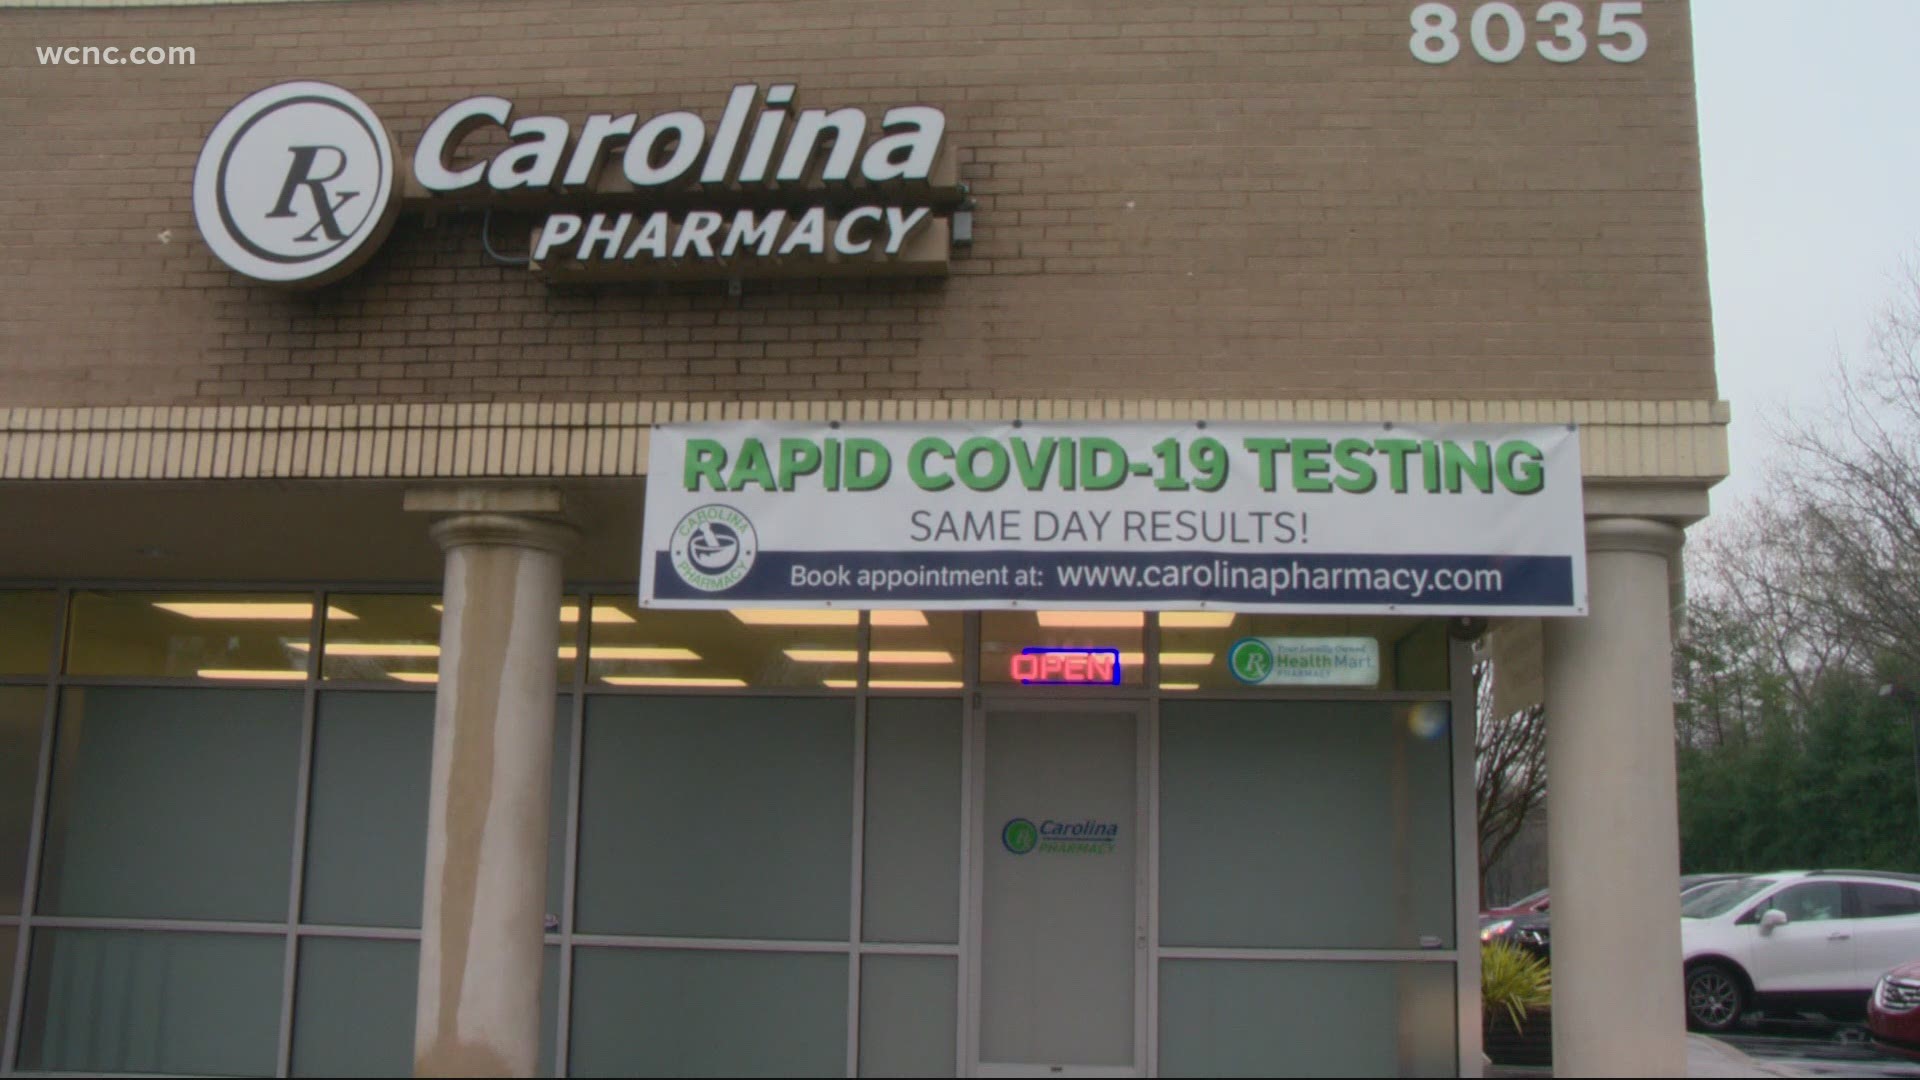 Many pharmacies across the Carolinas have been providing COVID-19 tests. Now, some are hoping to distribute COVID-19 vaccines.